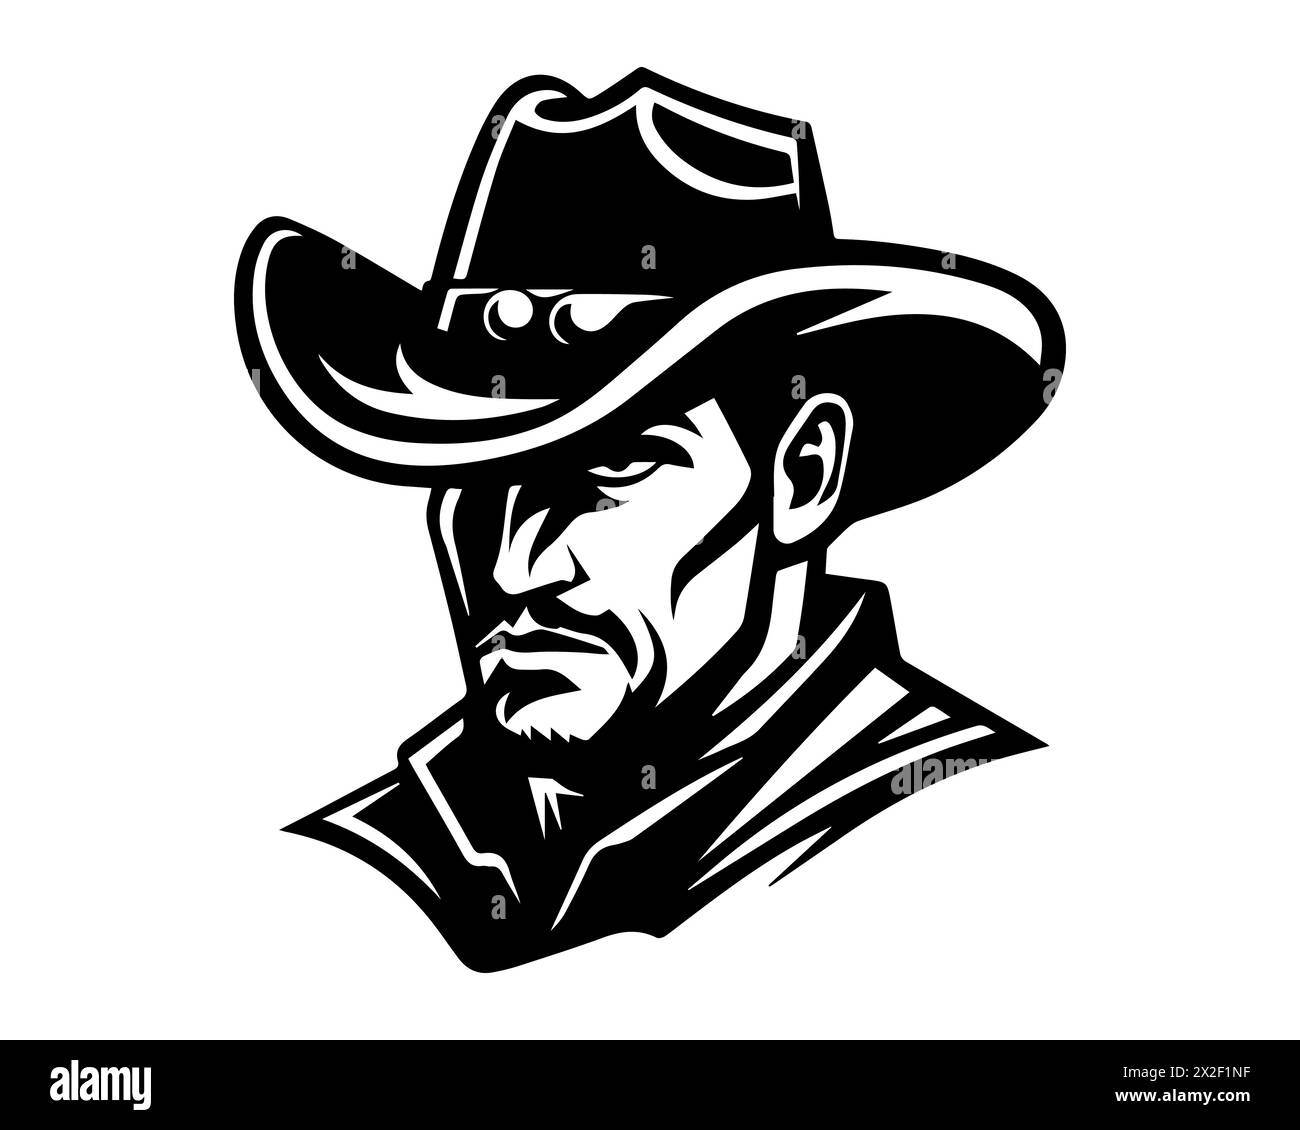 Black and white vector cowboy with a stern look. Hat-wearing bearded man in monochrome style. Isolated on white background. Concept of Wild West, trad Stock Vector